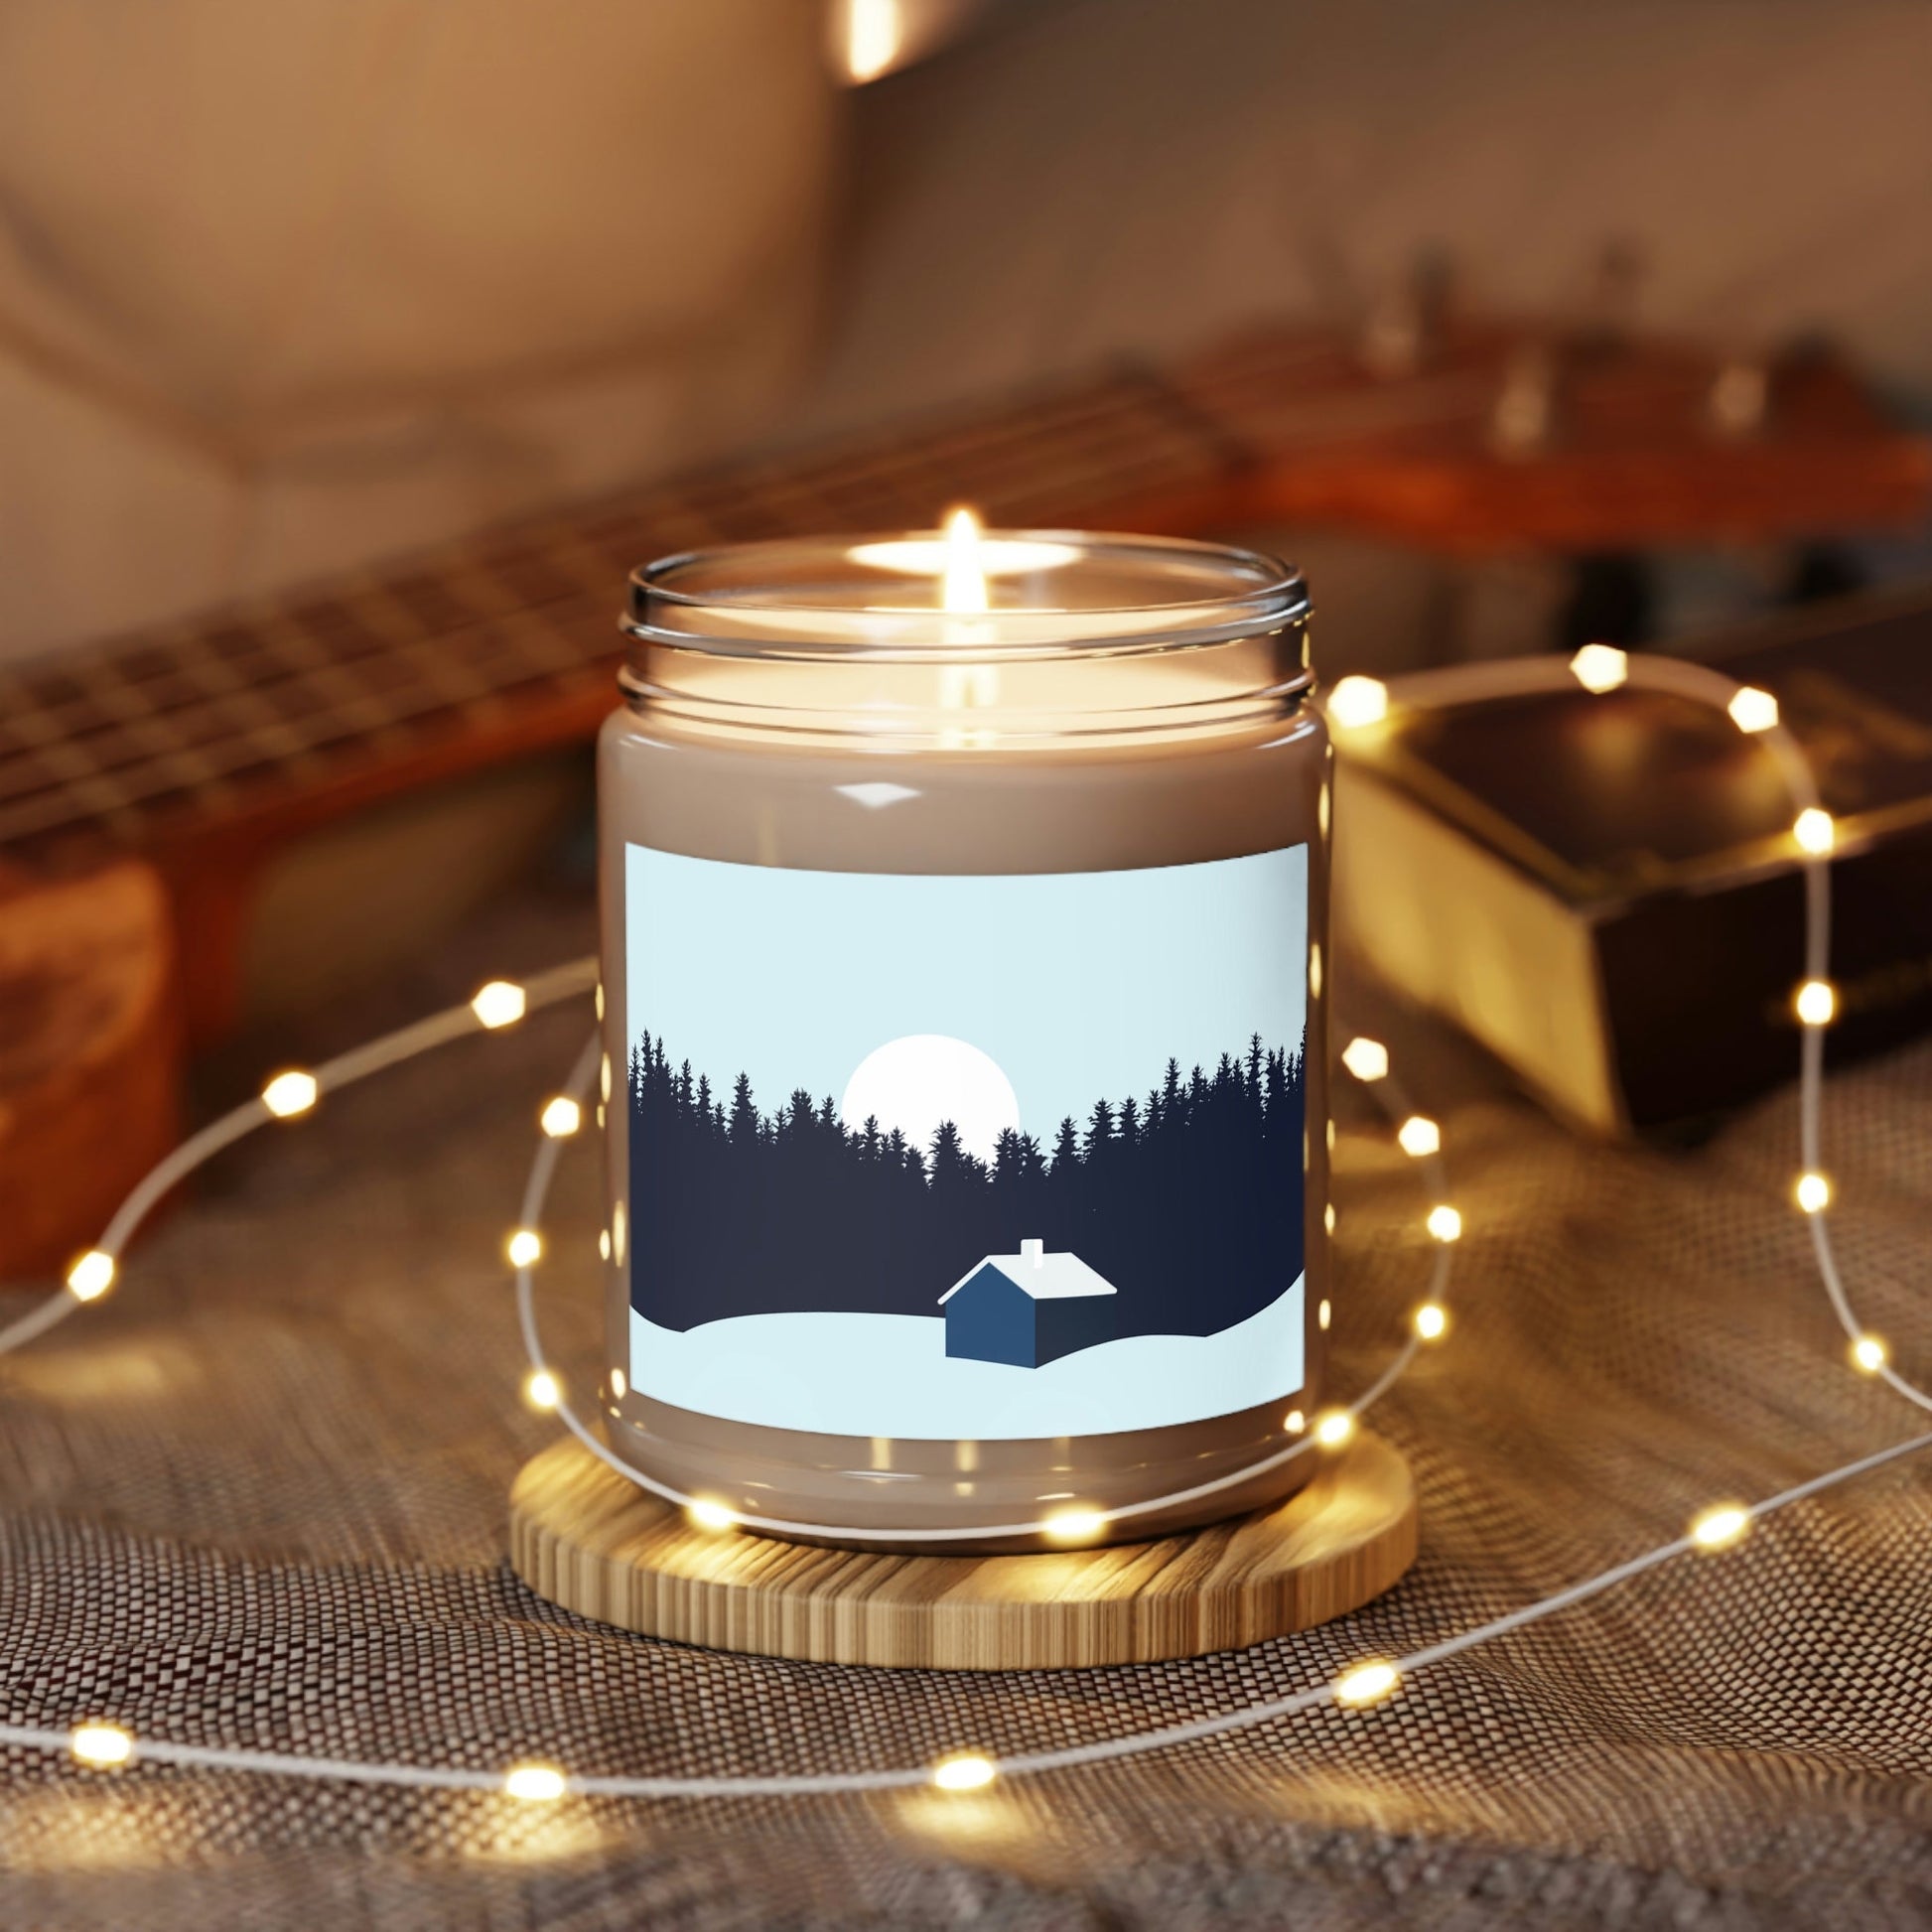 Frosty Morning Forest Minimal Art Scented Candle Up to 60h Soy Wax 9oz Ichaku [Perfect Gifts Selection]